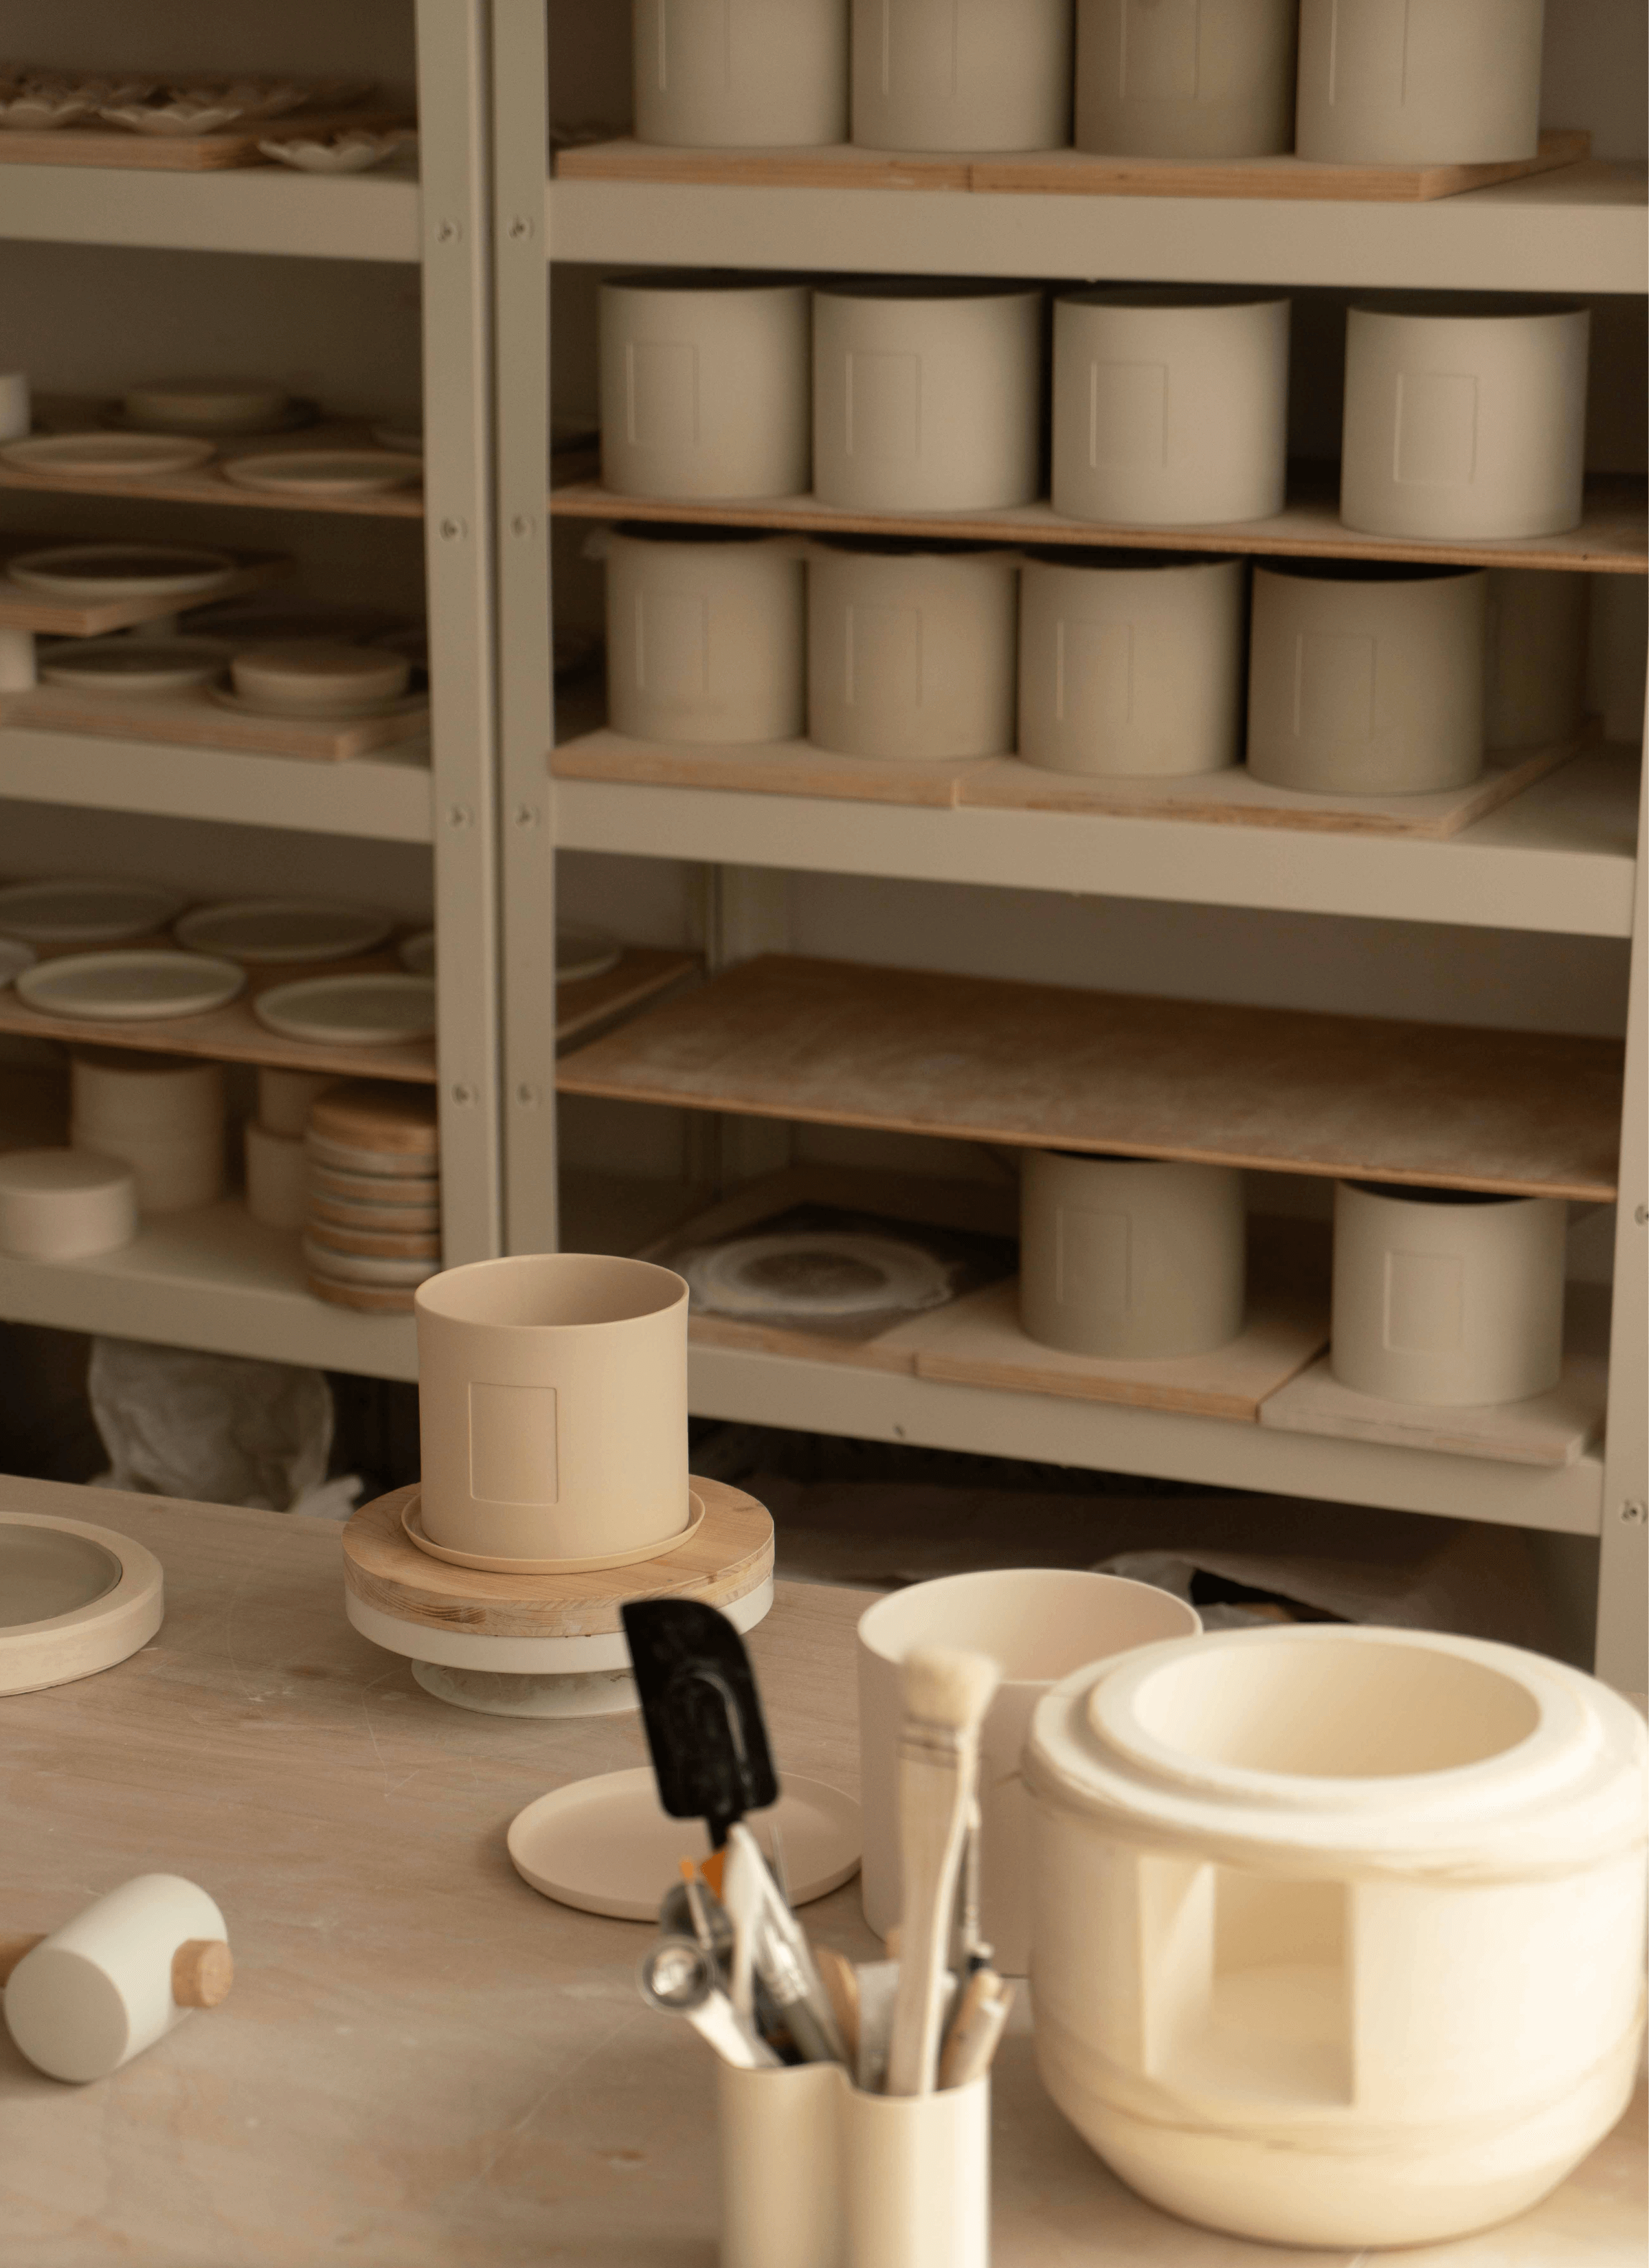 Tools and gadgets for ceramic laying out on the table with a shelf of ceramic pots, saucers and some flower shape germination disc on the shelf.